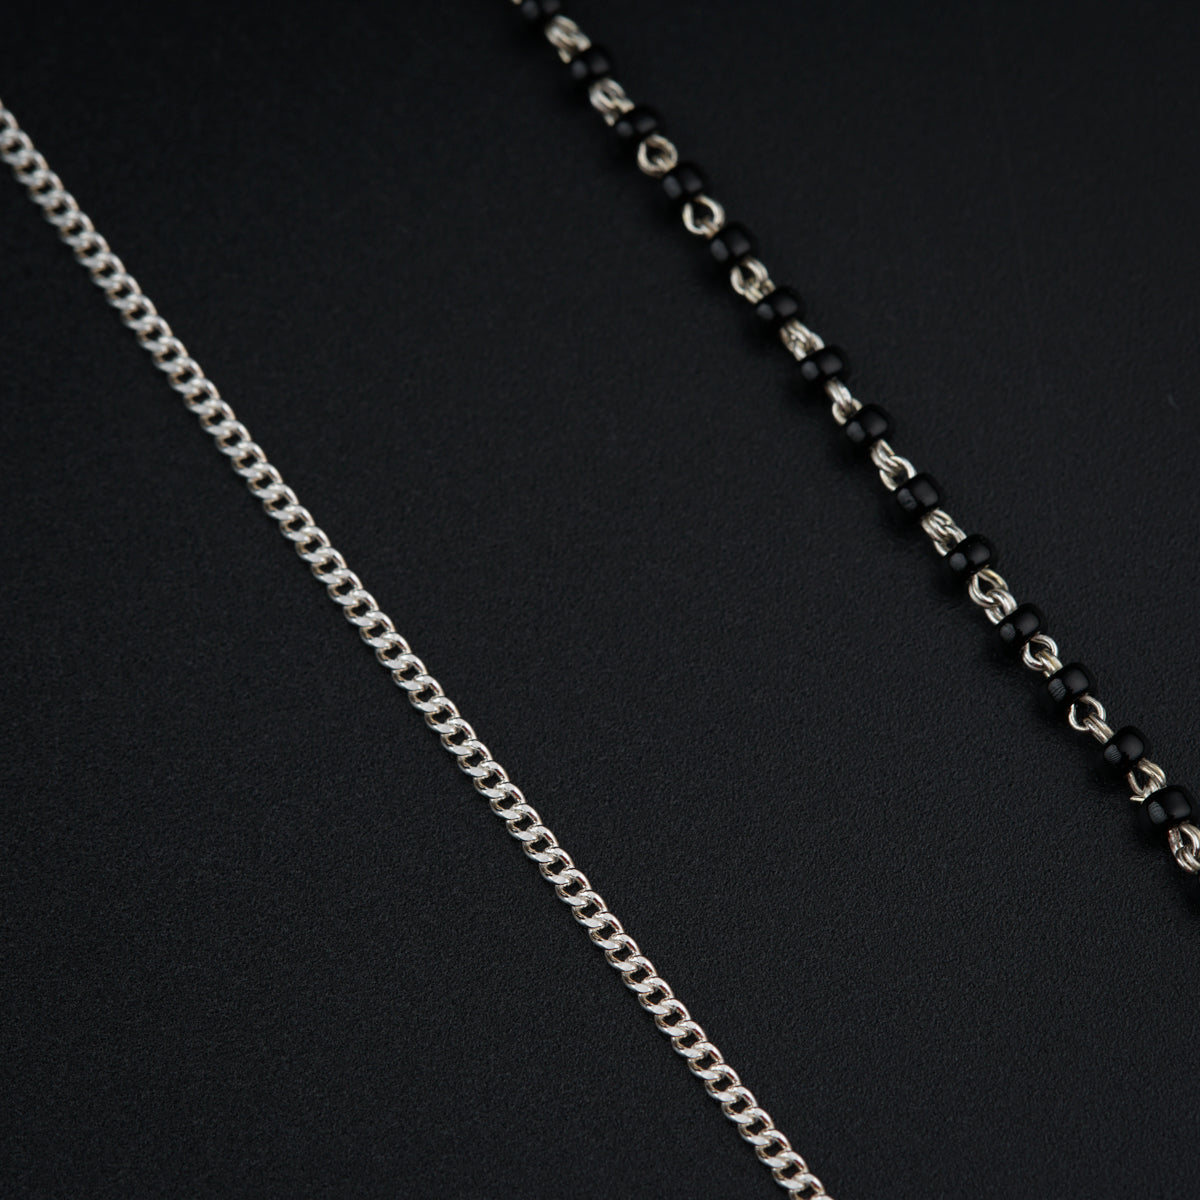 a close up of a chain on a black surface